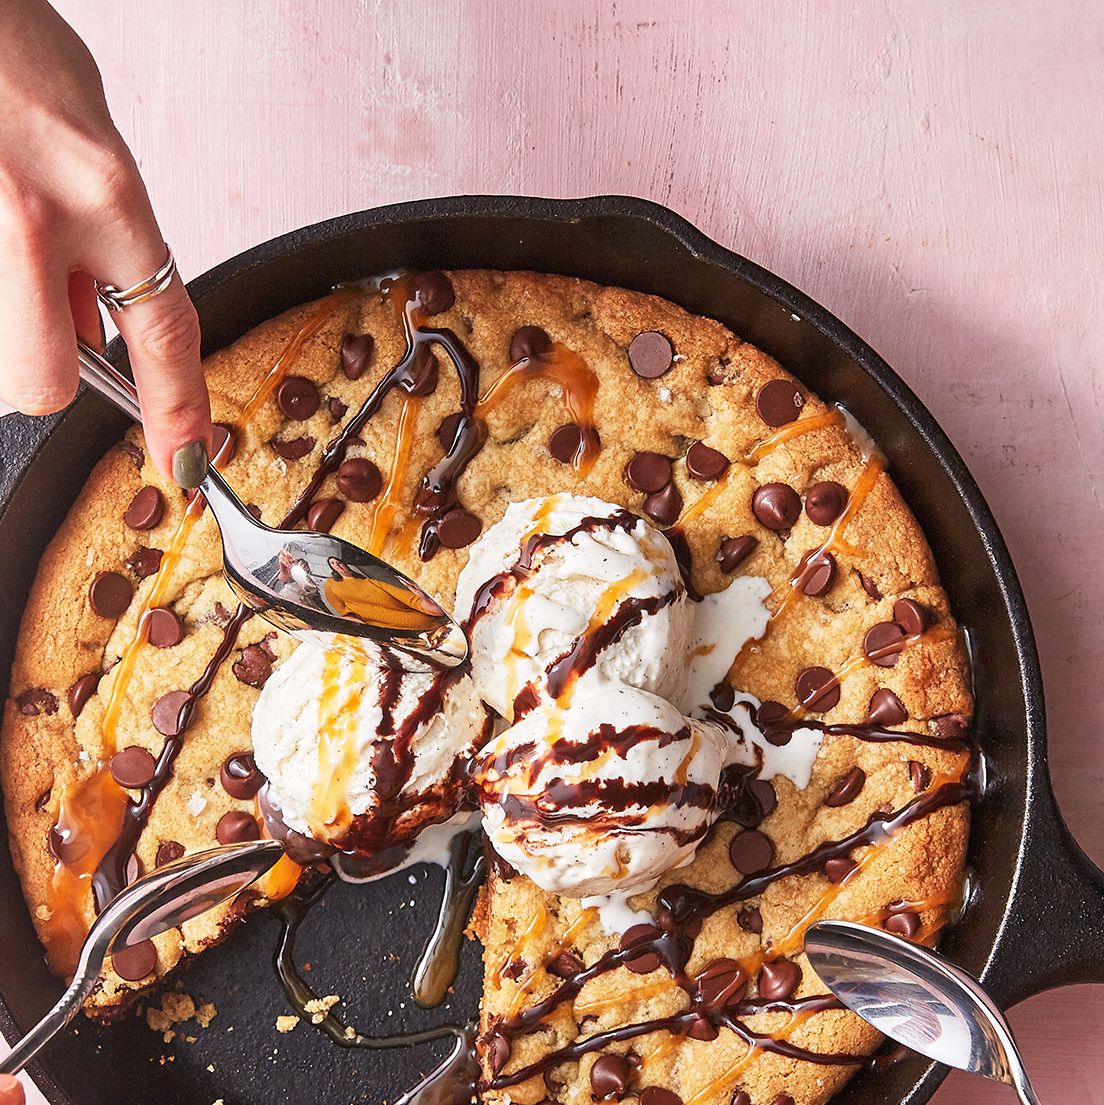 Making This Chocolate Chip Skillet Cookie Is The Best Way To End The Year